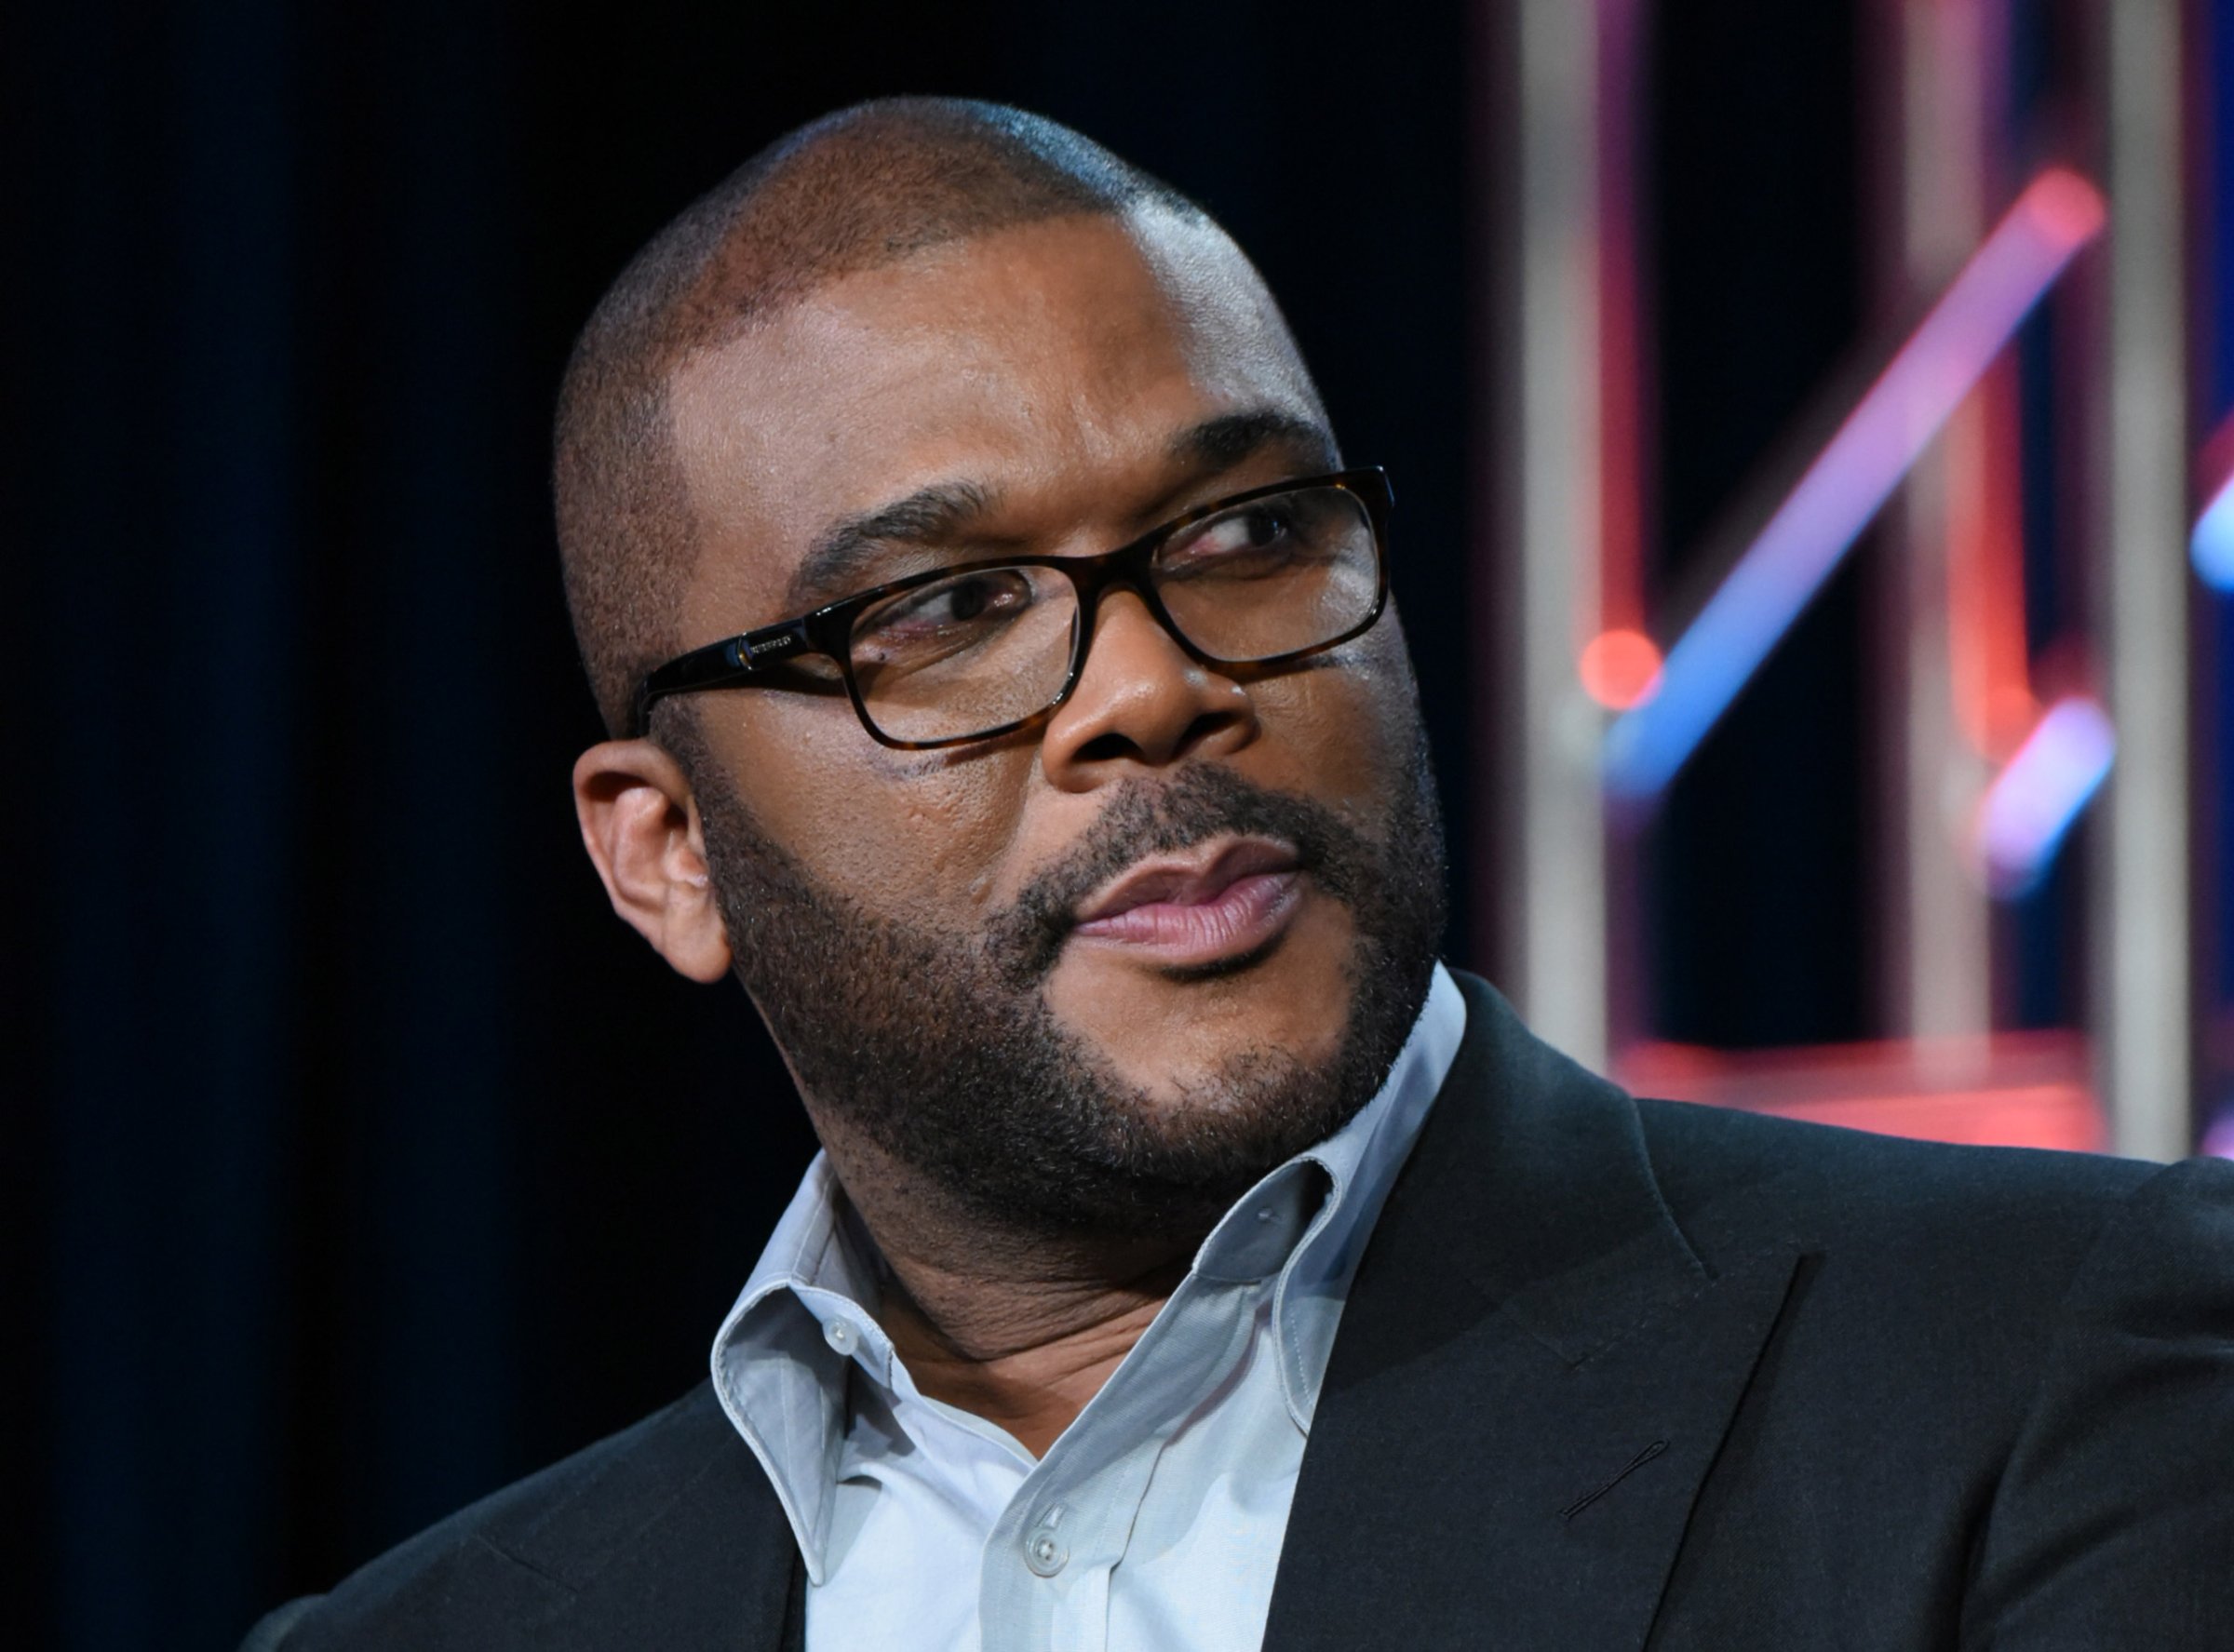 Tyler Perry participates in a panel for "The Passion" at the Fox Winter TCA on Friday, Jan. 15, 2016, Pasadena, Calif. (Photo by Richard Shotwell/Invision/AP)